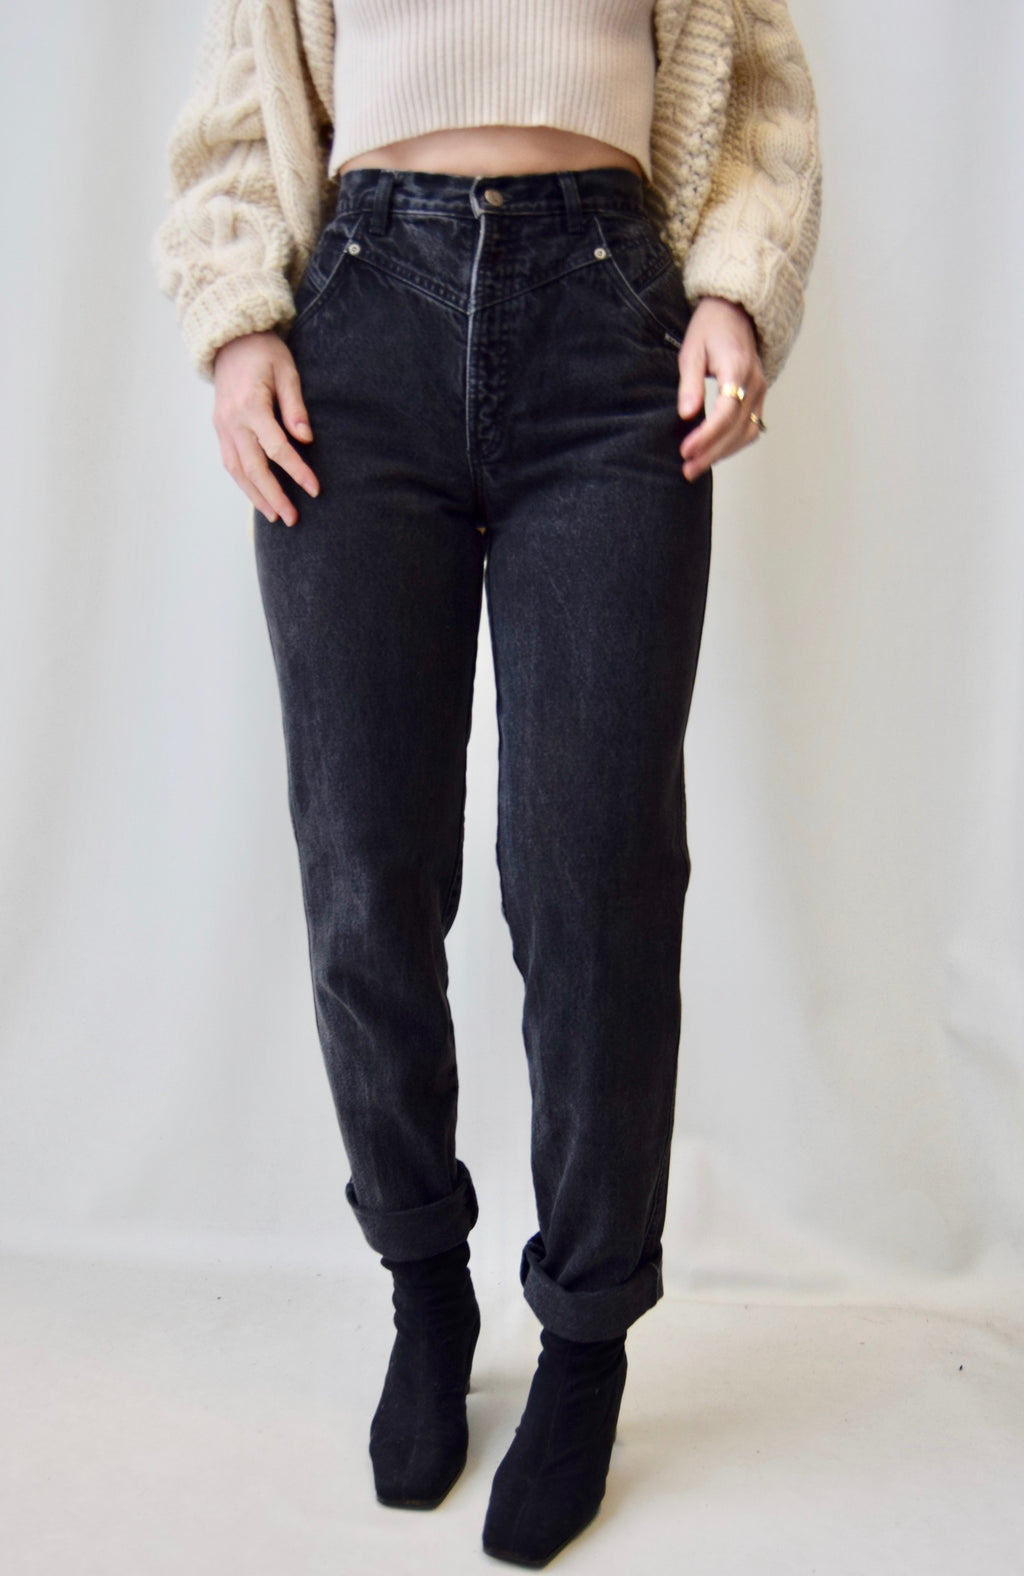 Charcoal Western Style Jeans